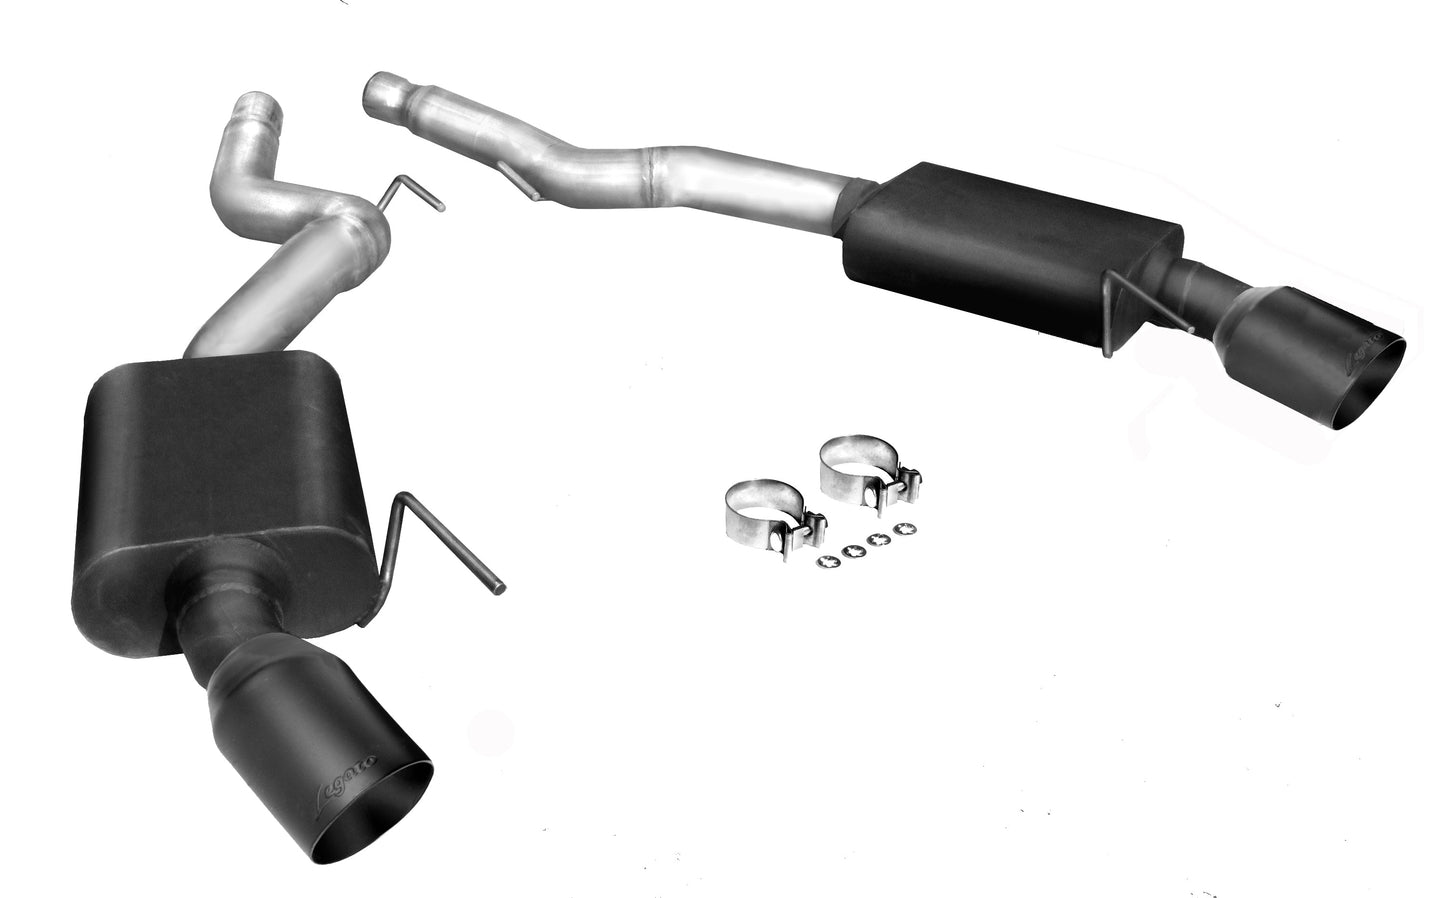 LEX4604 - Ford Mustang GT V8 Axle Back Exhaust 2015 - Professional Products